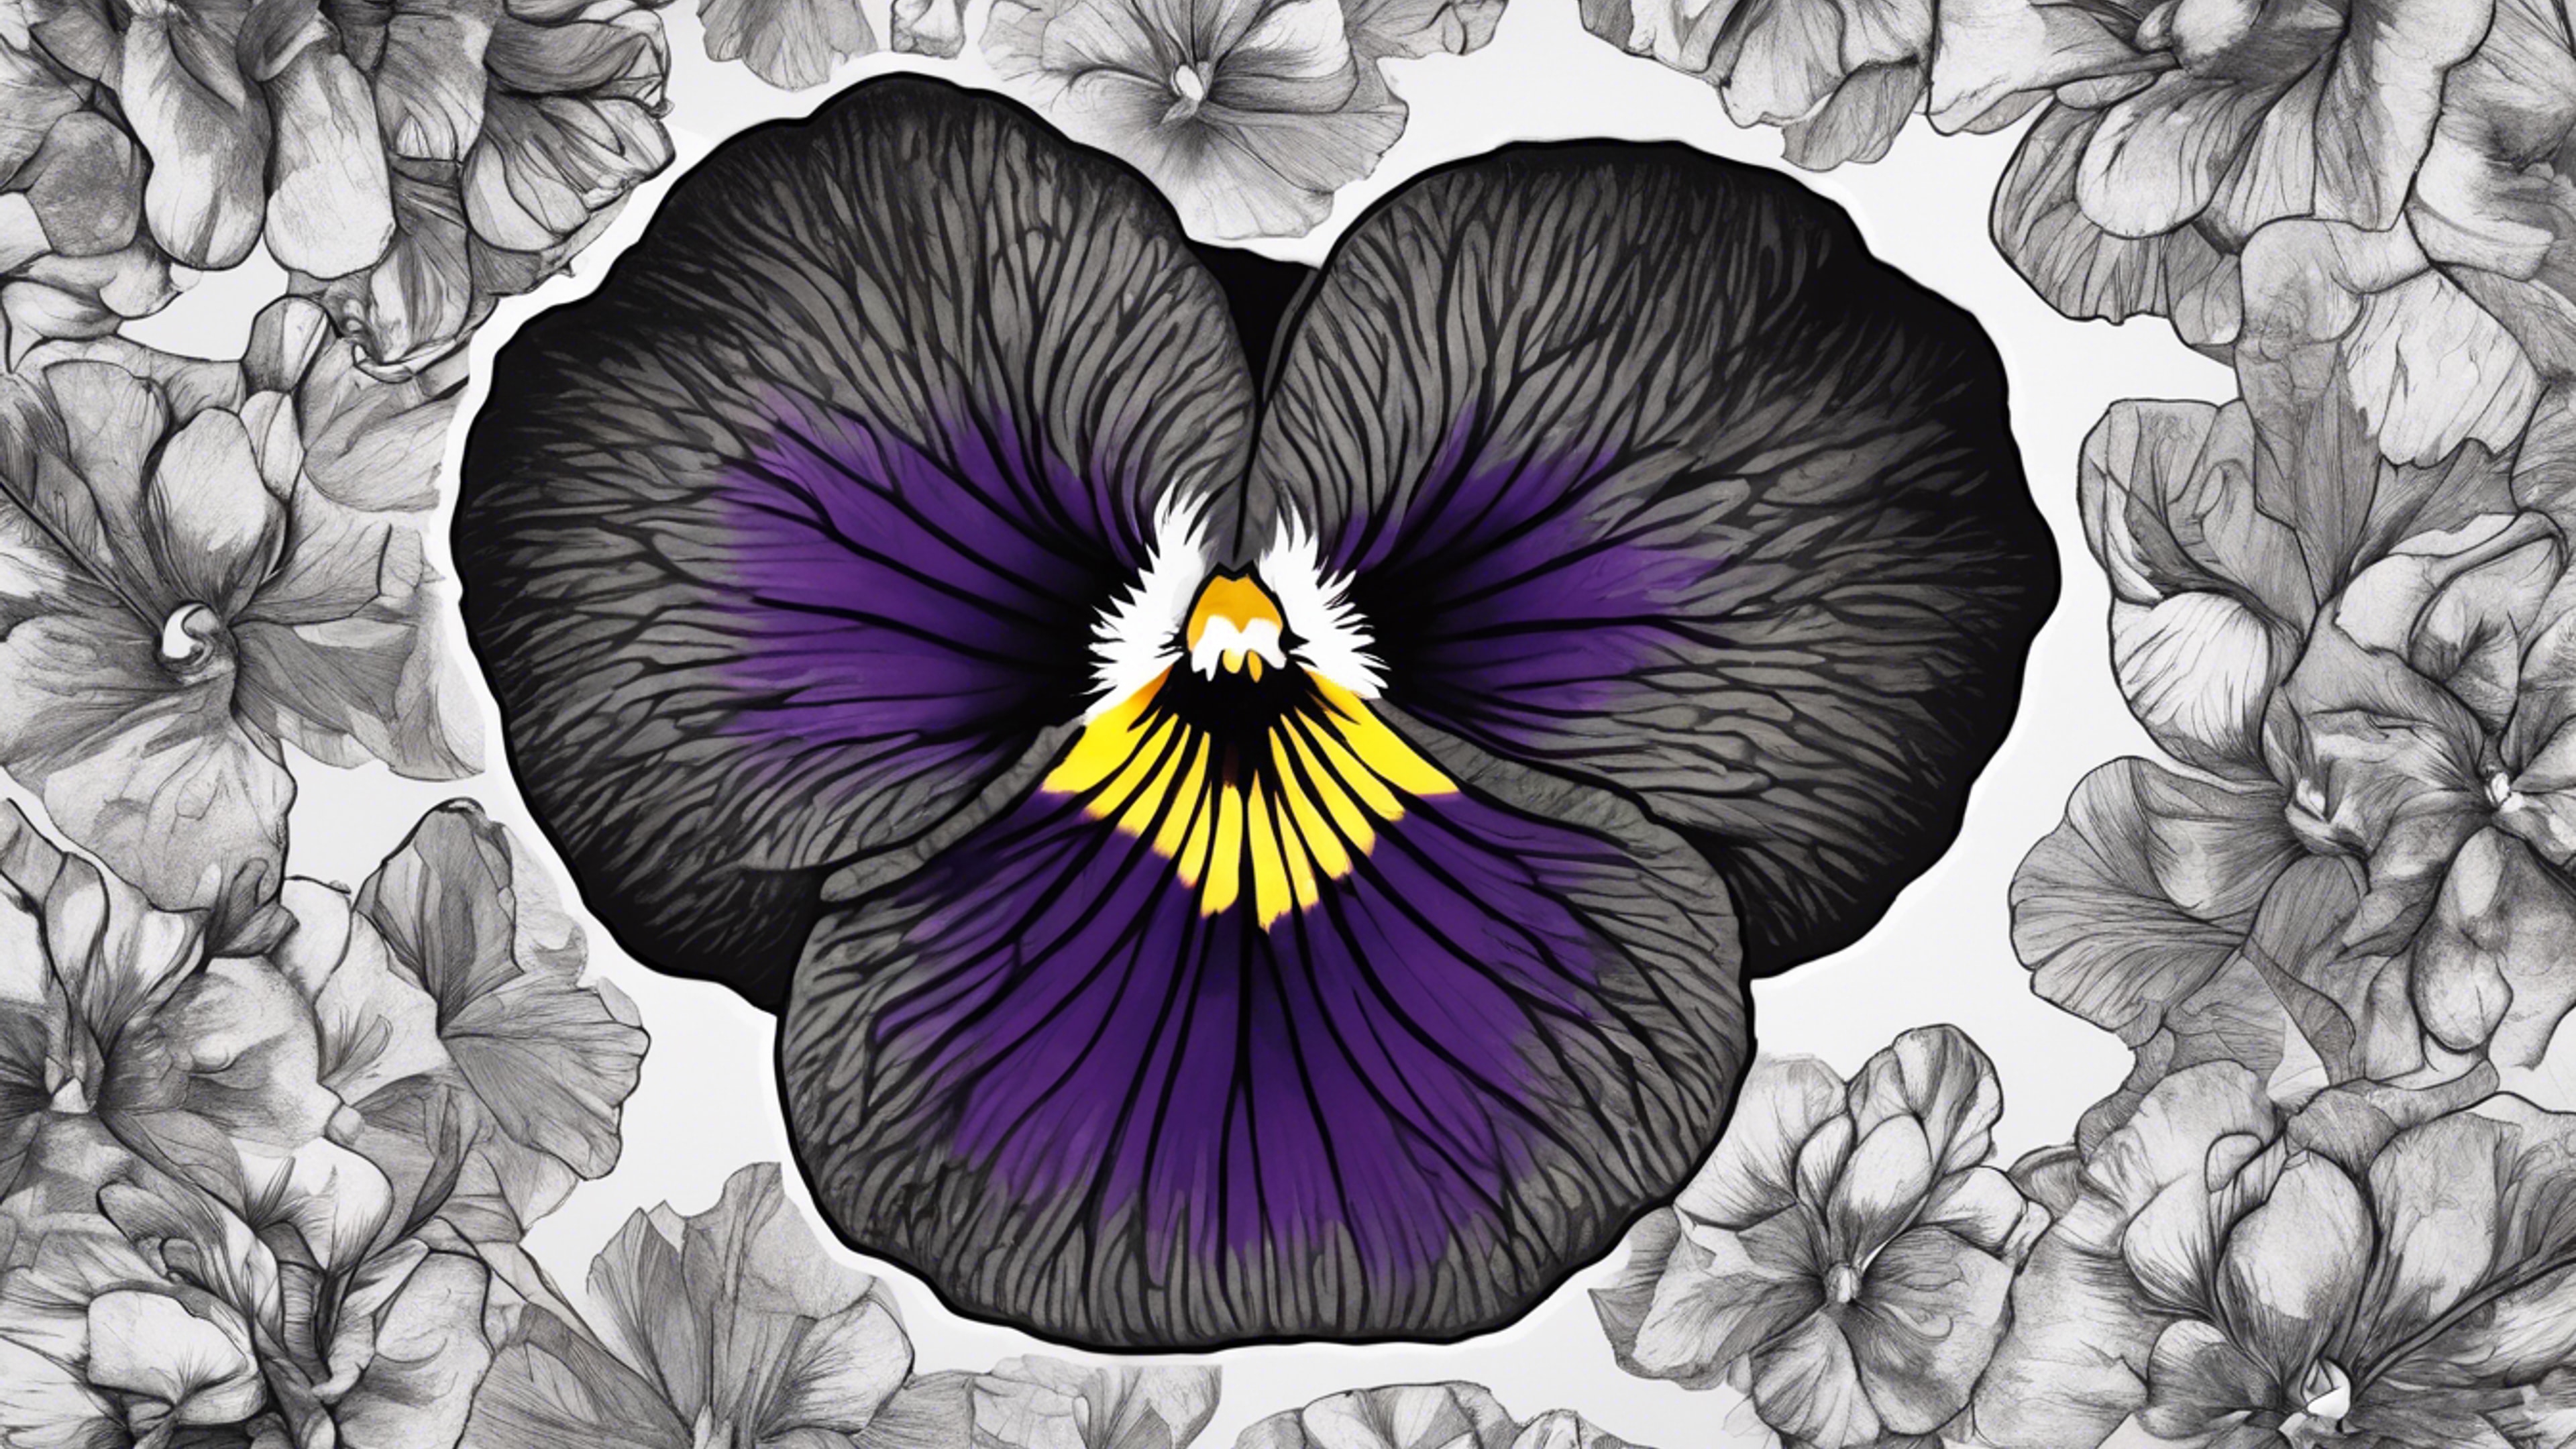 A beautifully detailed drawing of a black pansy with a heart-shaped pattern in the center. کاغذ دیواری[63bdabf8c2fc479fa211]